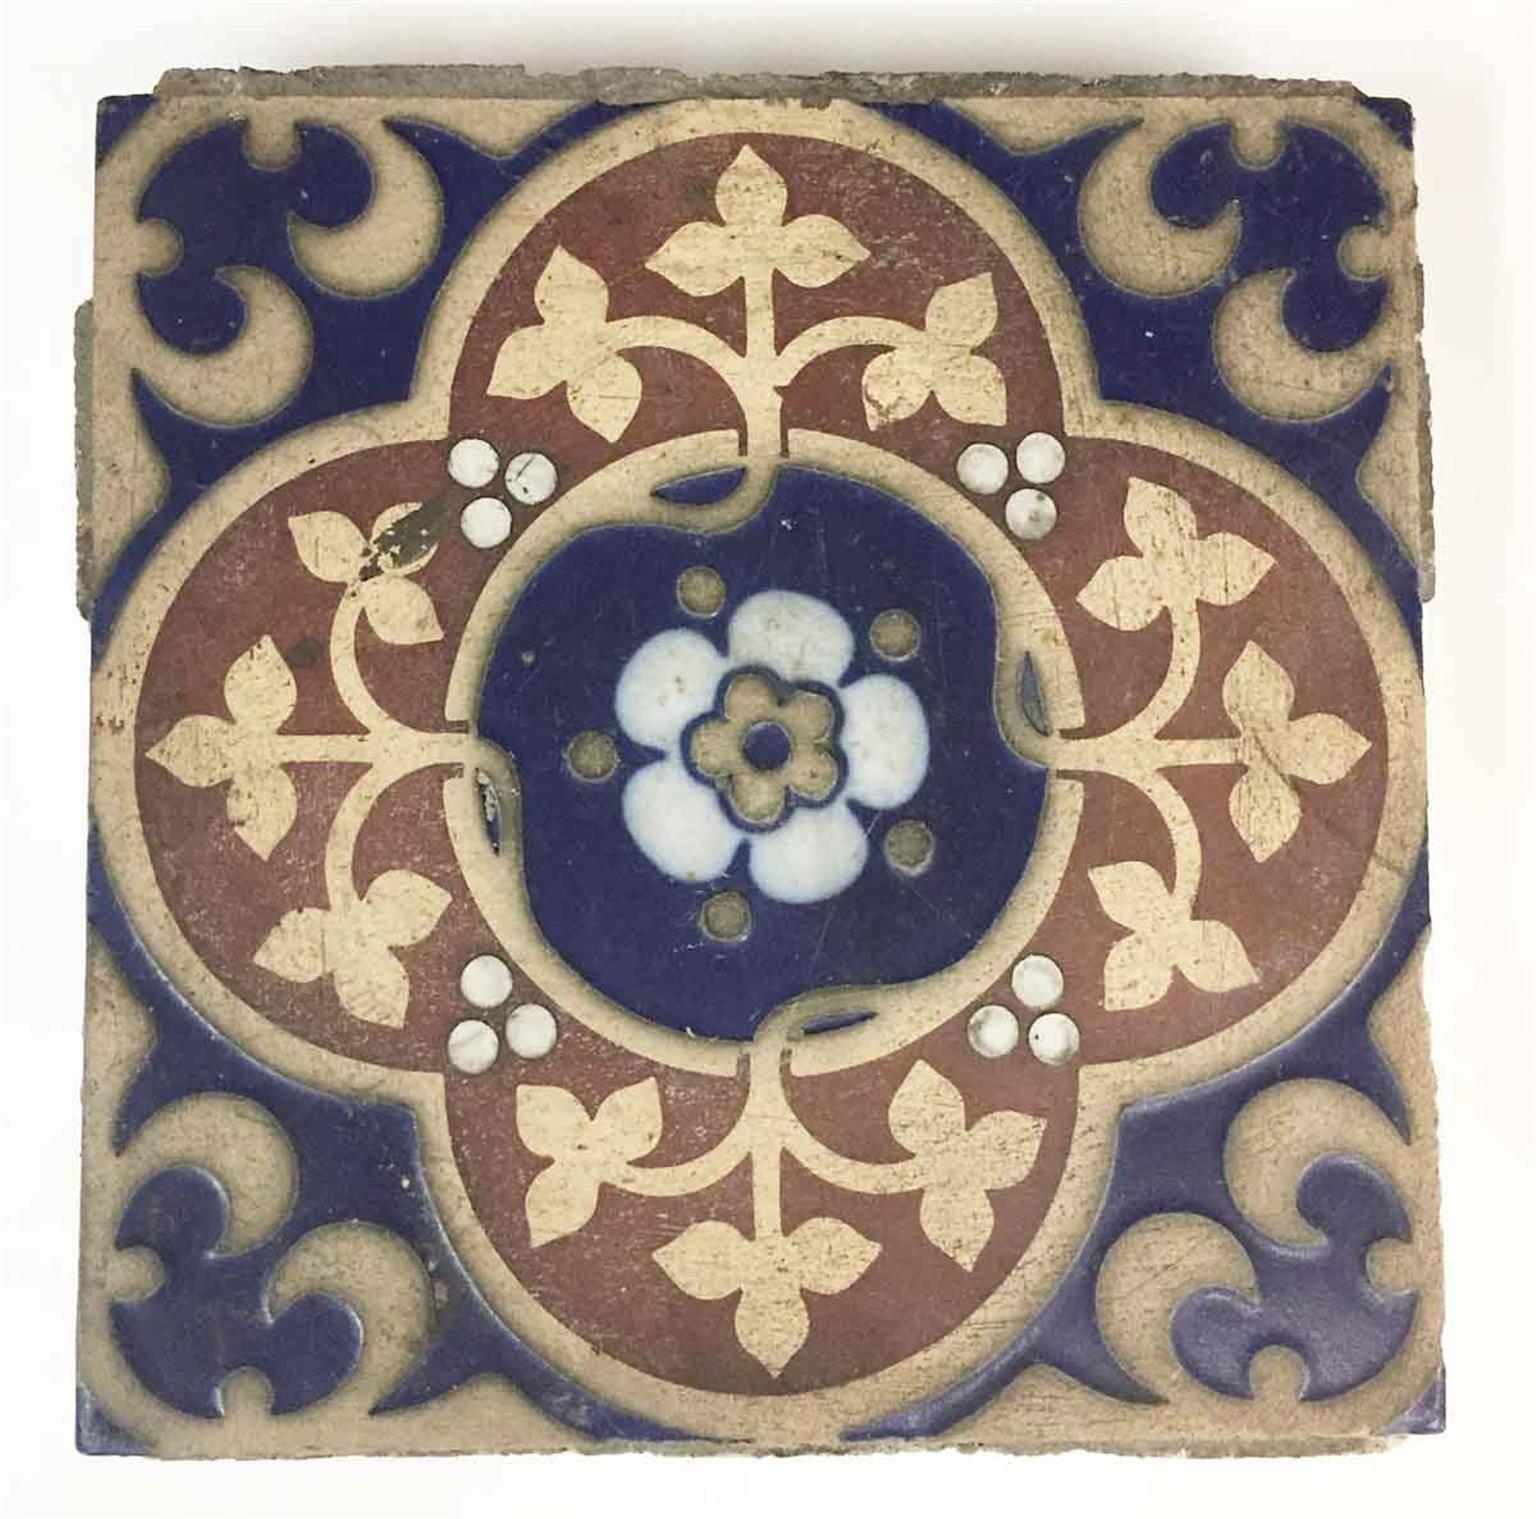 1920s encaustic Minton 'Stoke Upon Trent' tile floor. Red, blue, tan and white in color. Set includes nine flower leaf styles, 86 leaf styles and 45 flower styles of tile, calculating 22 square feet total, which is 139 total tiles. Some tiles have